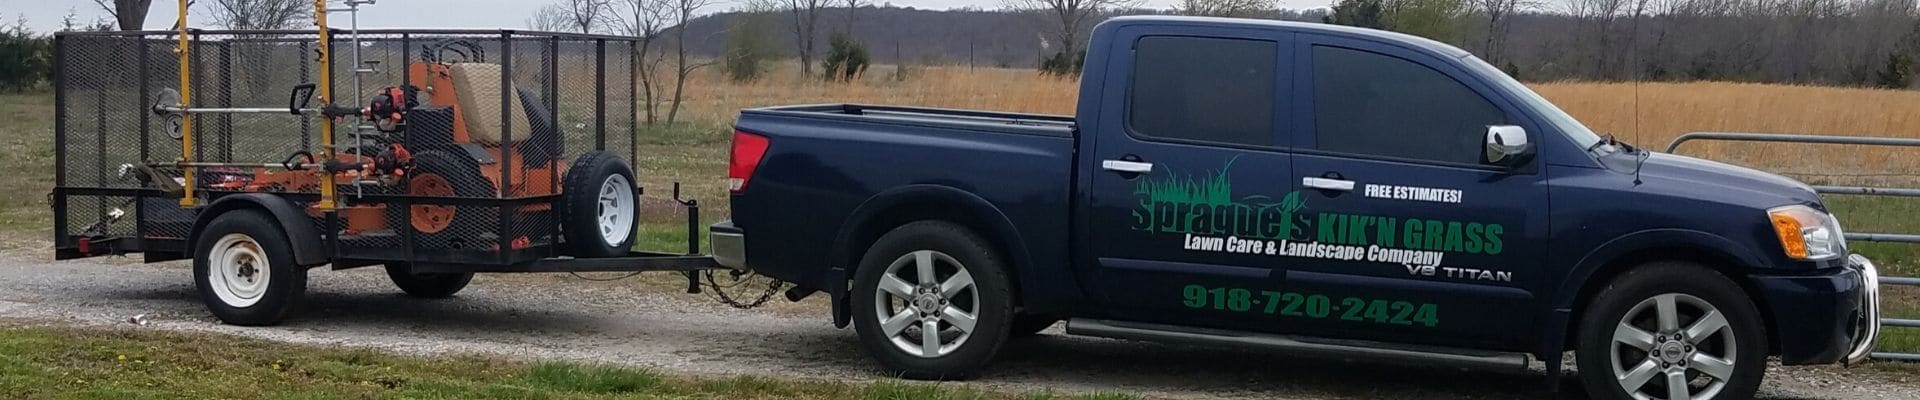 A black work truck with Sprague's Kik'N Grass logo printed on the sid. The truck is hauling a trailer carrying a large lawn mower.